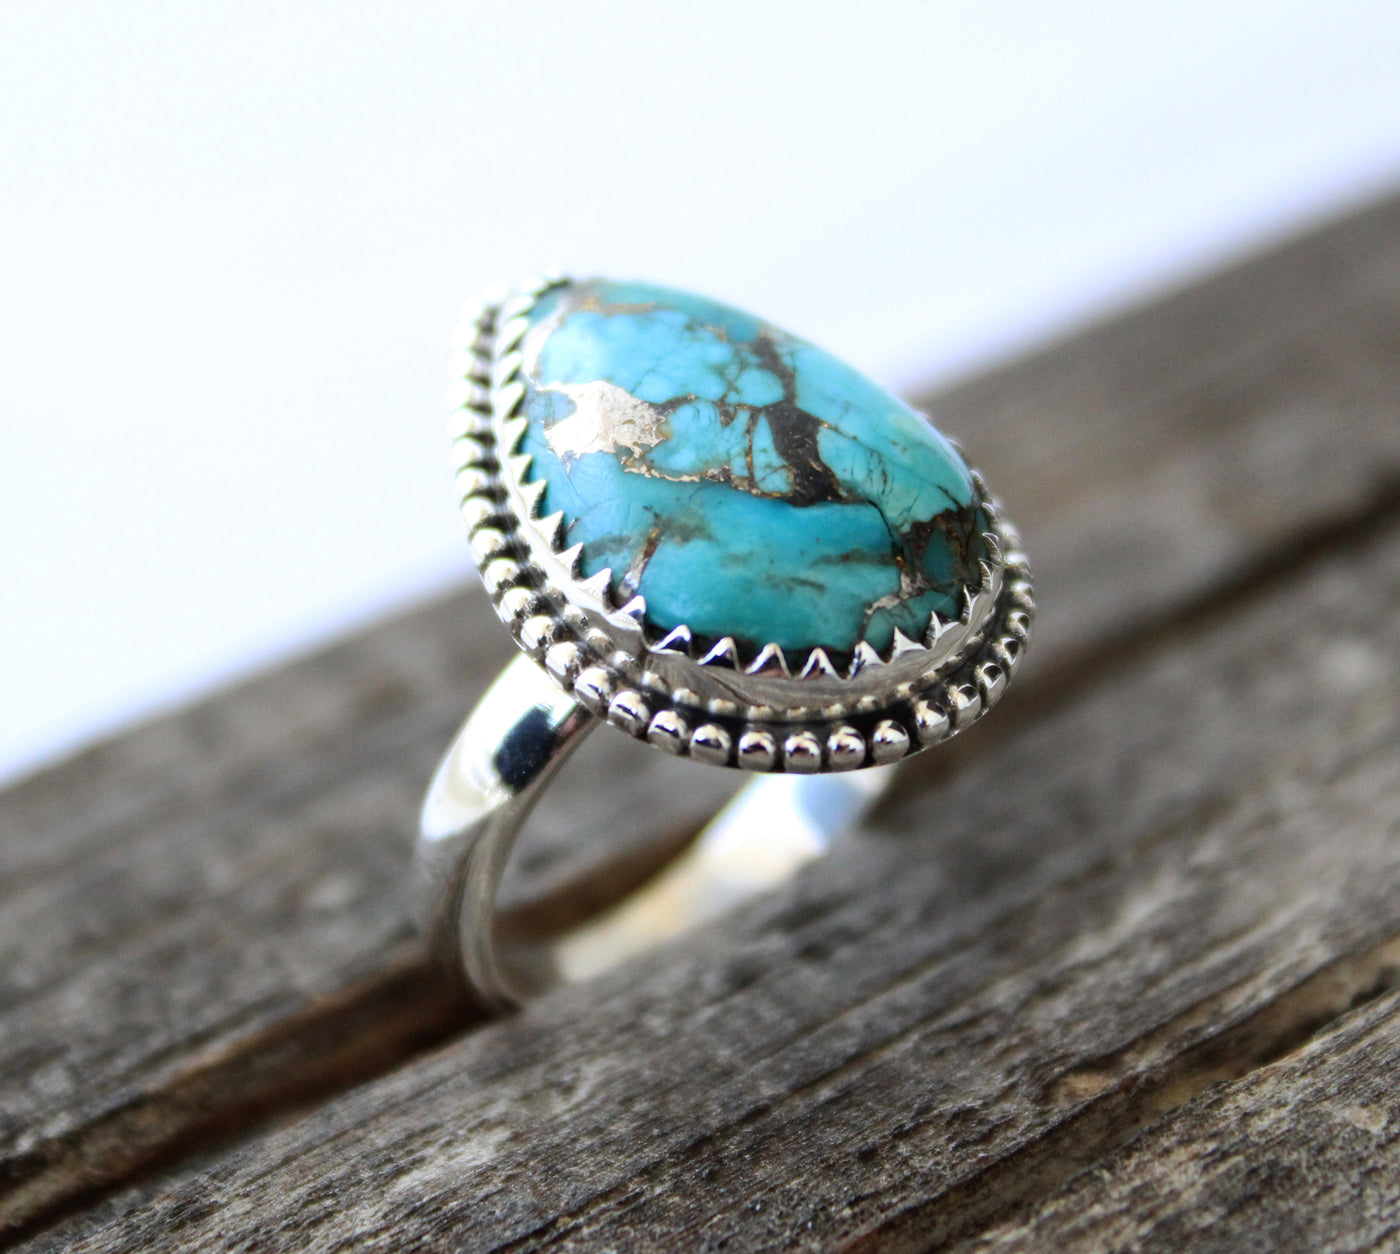 Copper Turquoise Ring, Handmade Silver Ring, 925 Sterling Silver Ring, Tear Drop Blue Copper Turquoise Ring,December Birthstone,Promise Ring